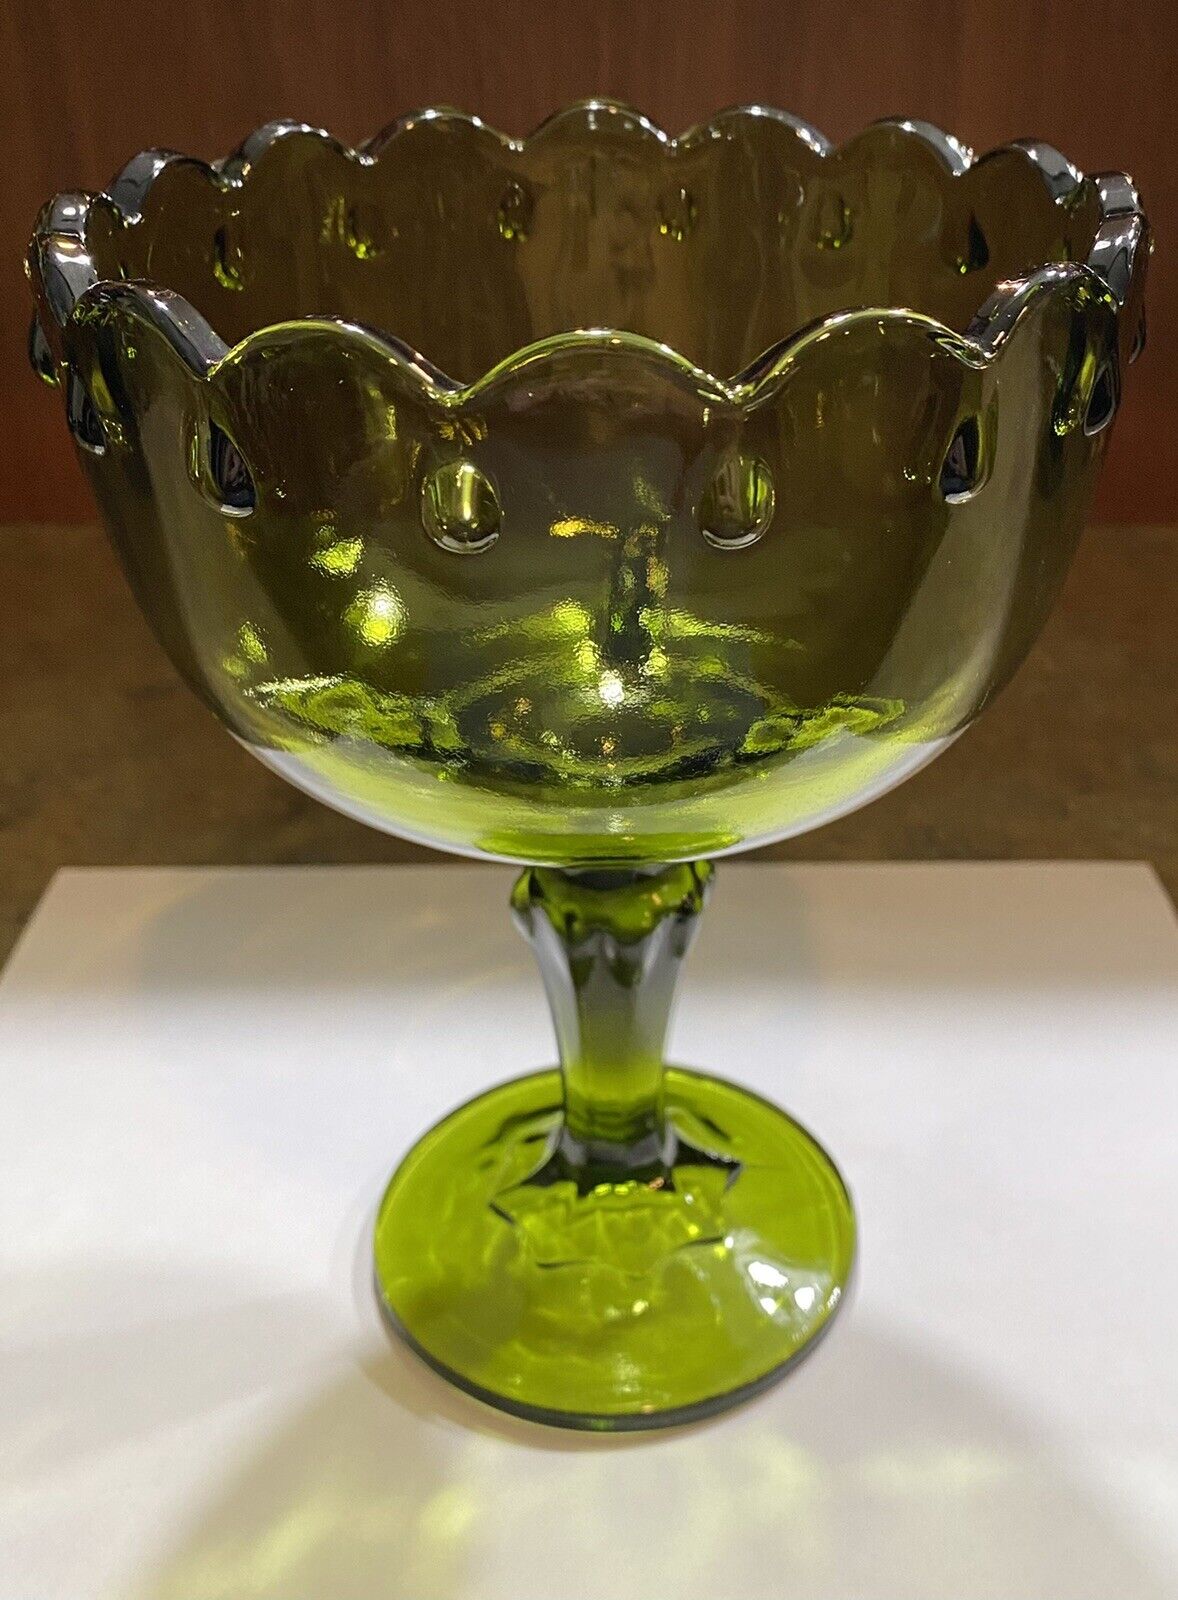 Vintage Indiana Glass Green Teardrop Pedestal Compote Bowl Candy Dish